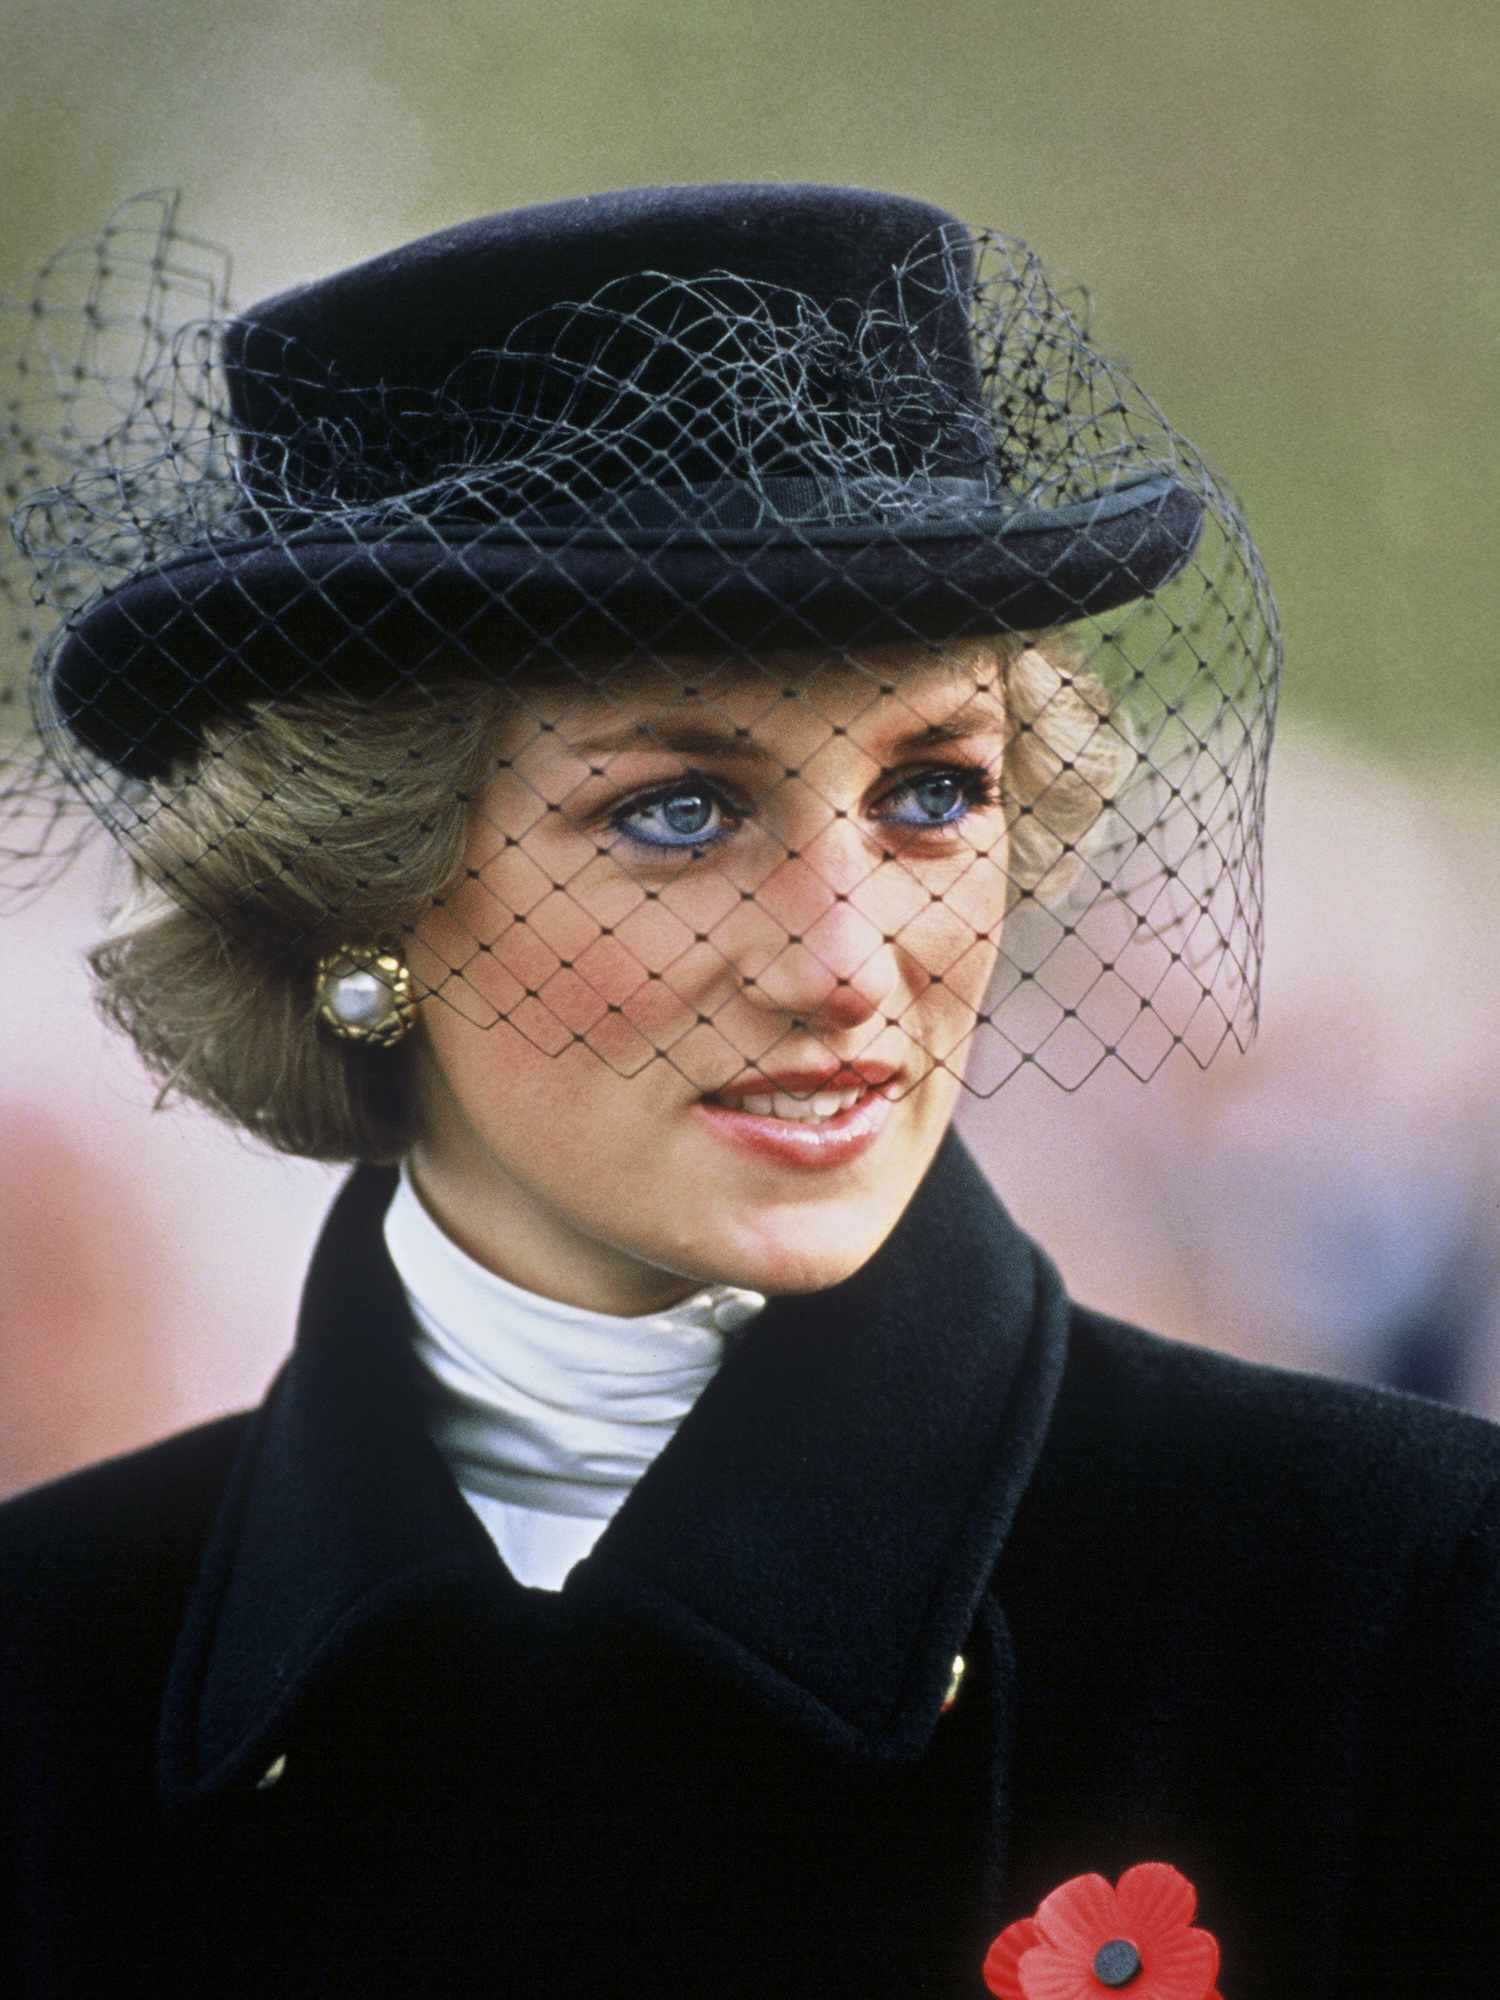 Princess Diana with a short bob hairstyle and black brimmed hat with netting